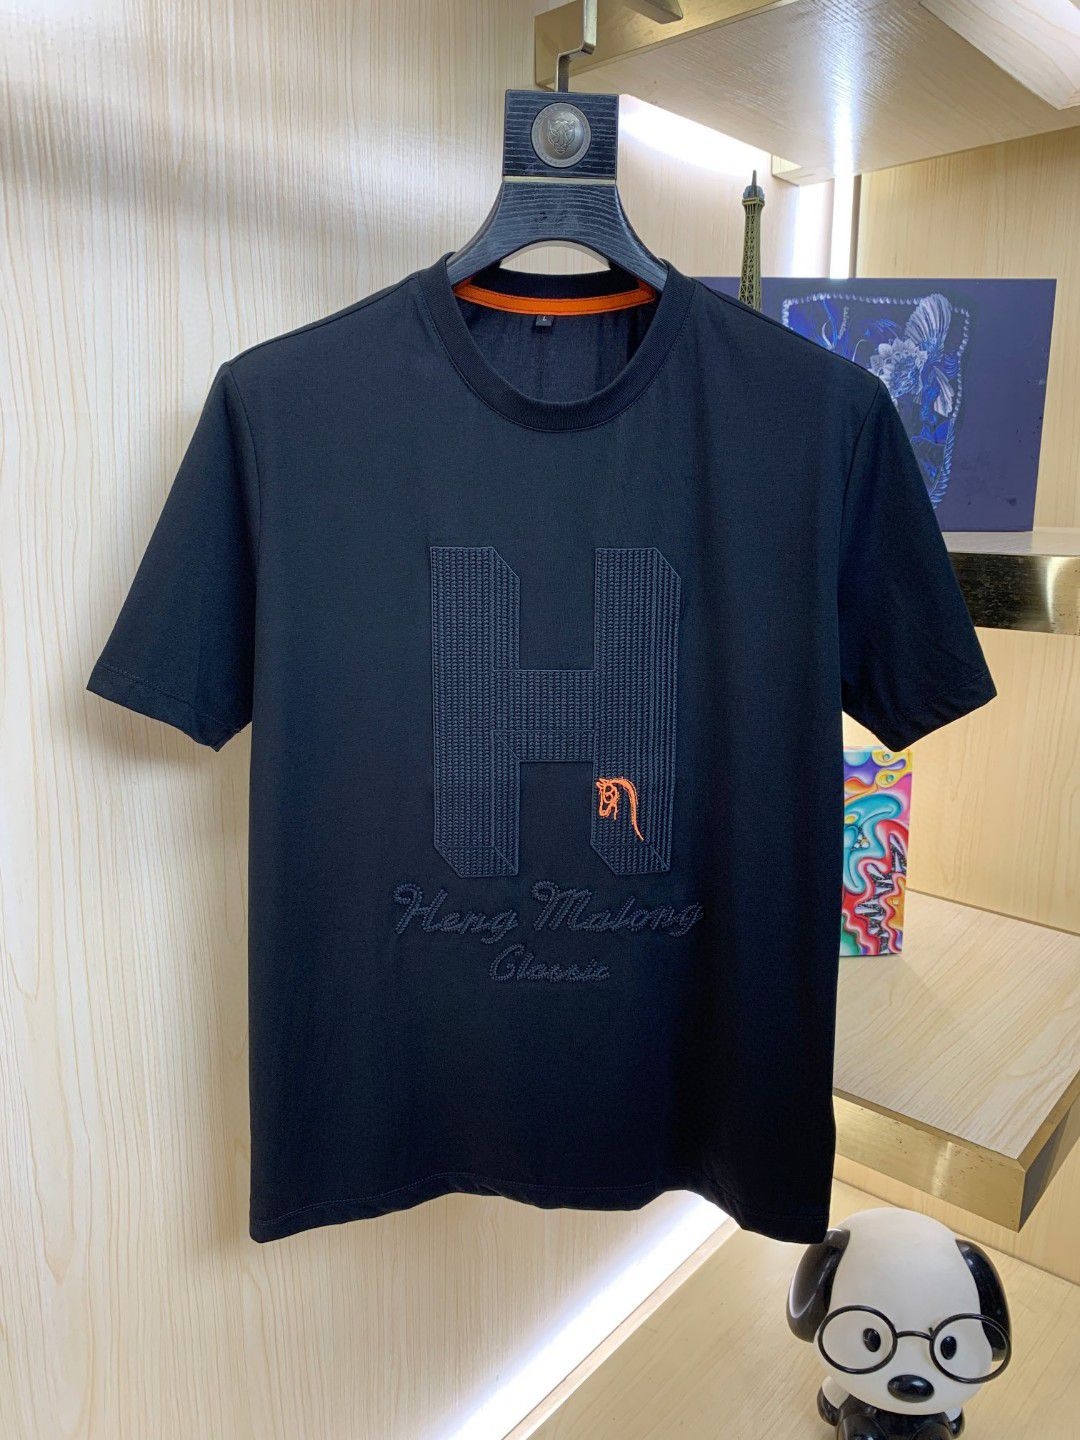 Hermes Clothing T-Shirt Designer Wholesale Replica
 Summer Collection Fashion Short Sleeve